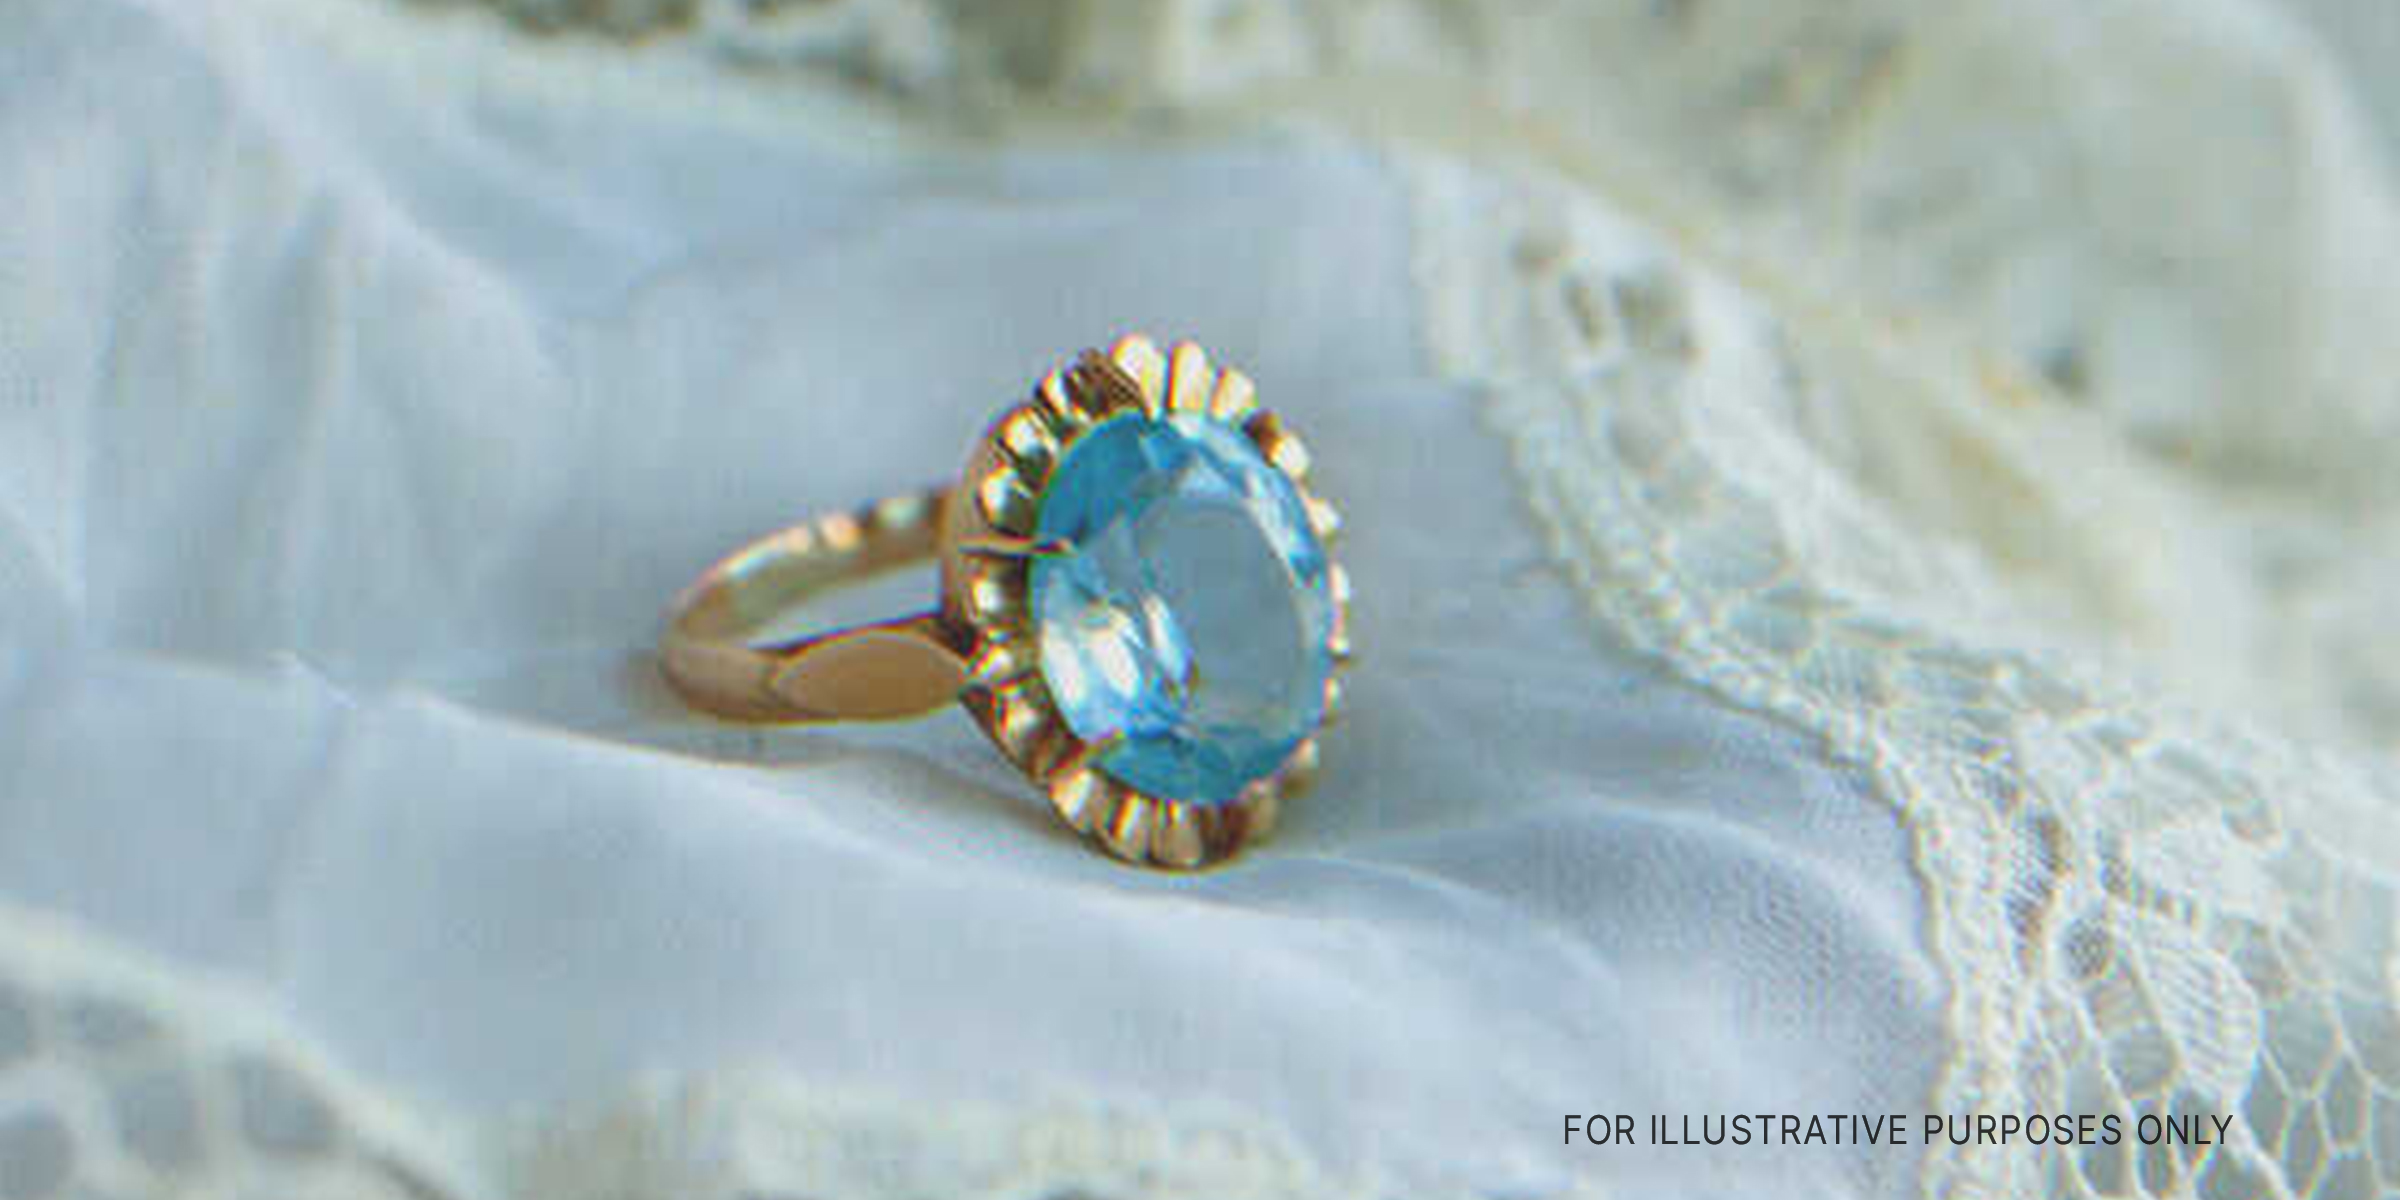 Gold ring with a blue stone | Source: Shutterstock